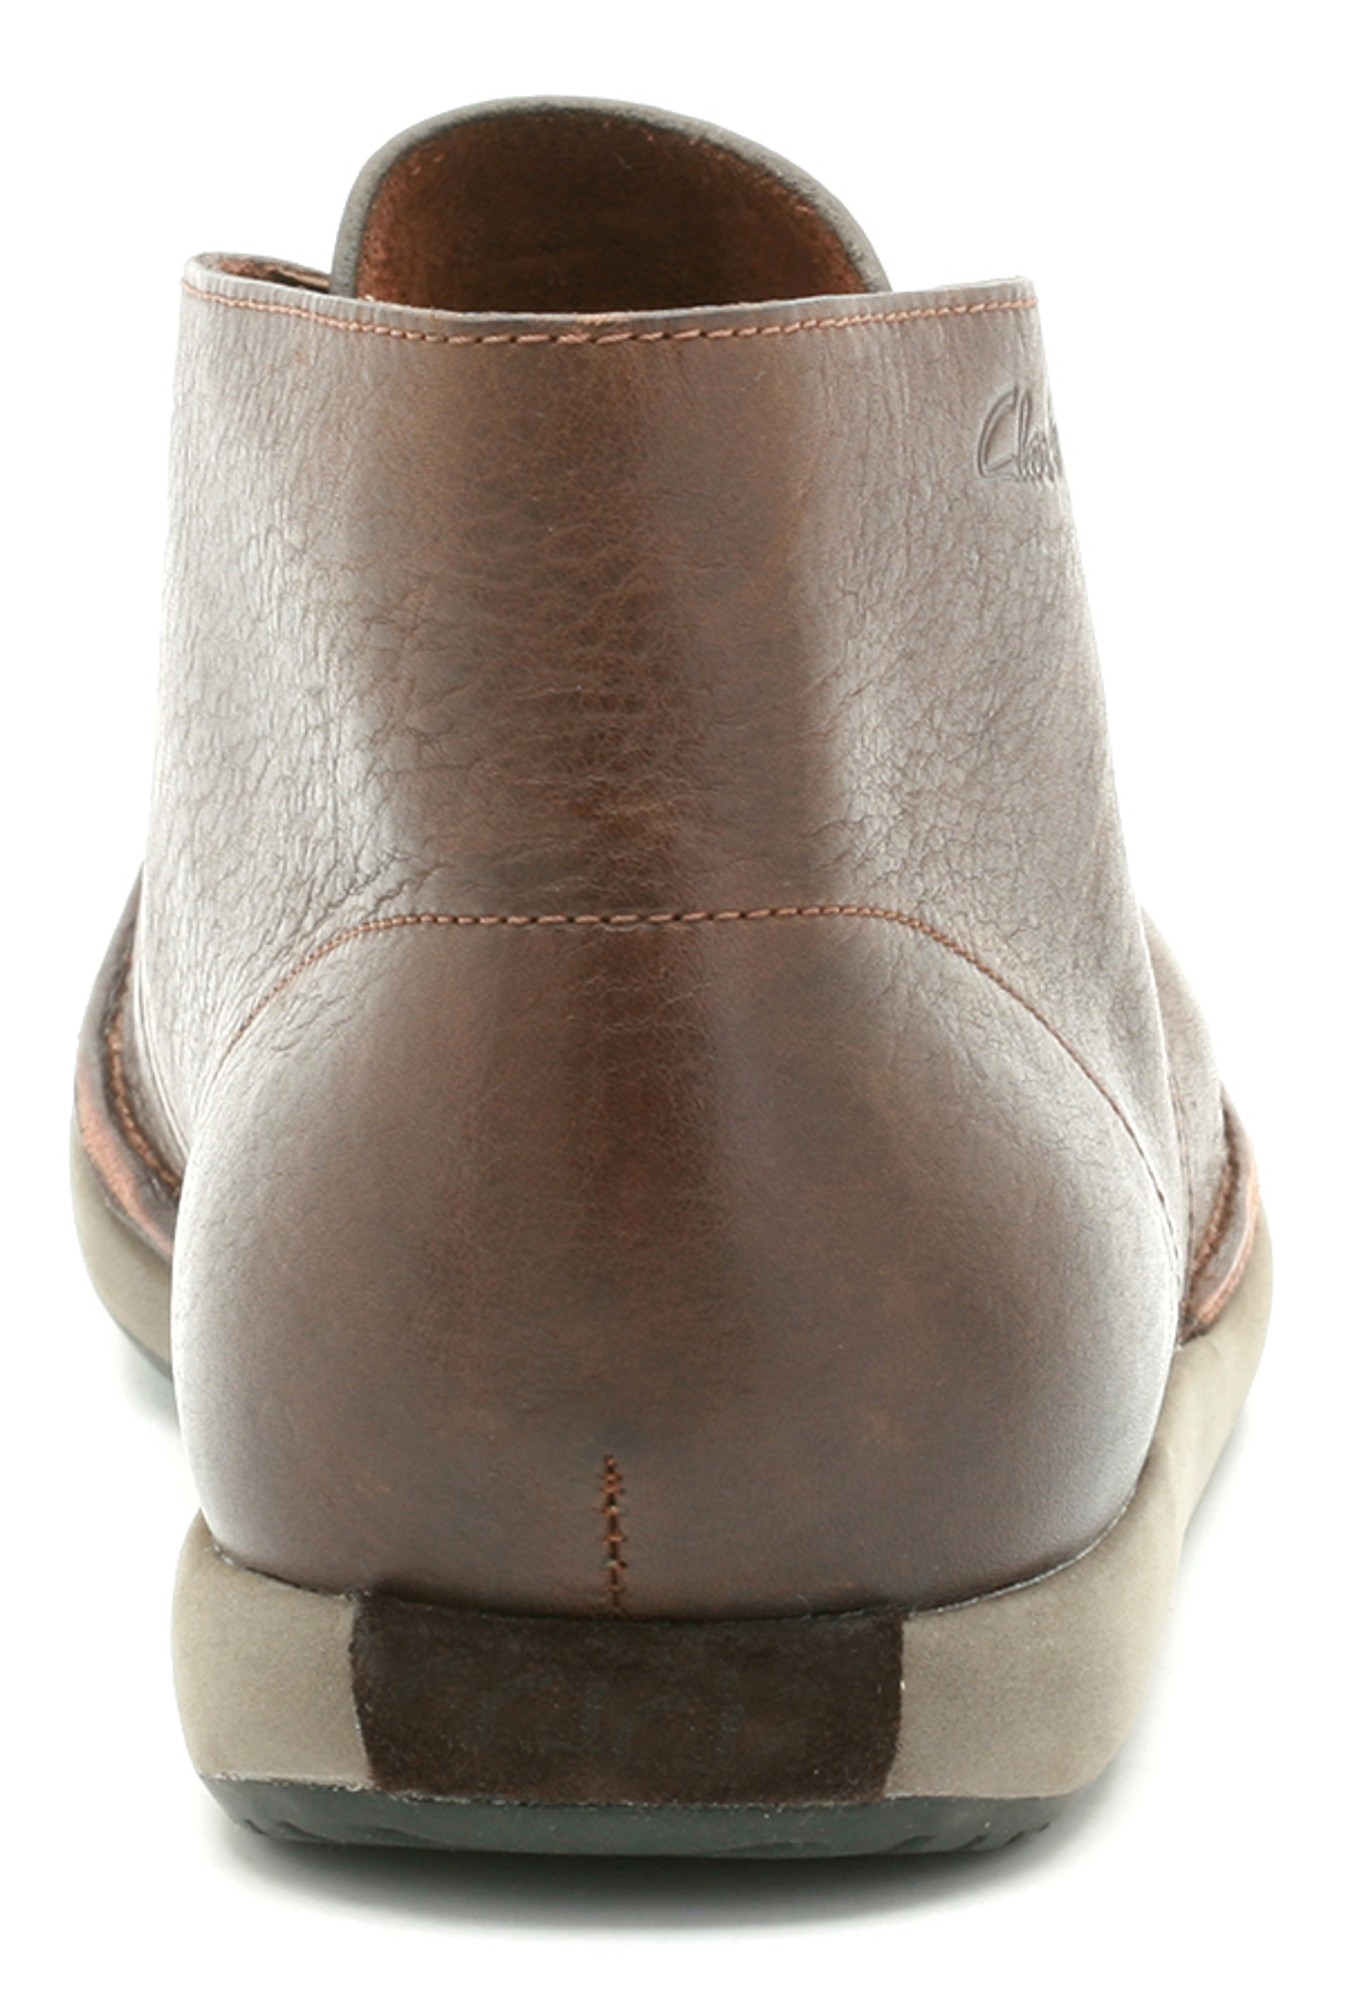 clarks newton mass brown loafers